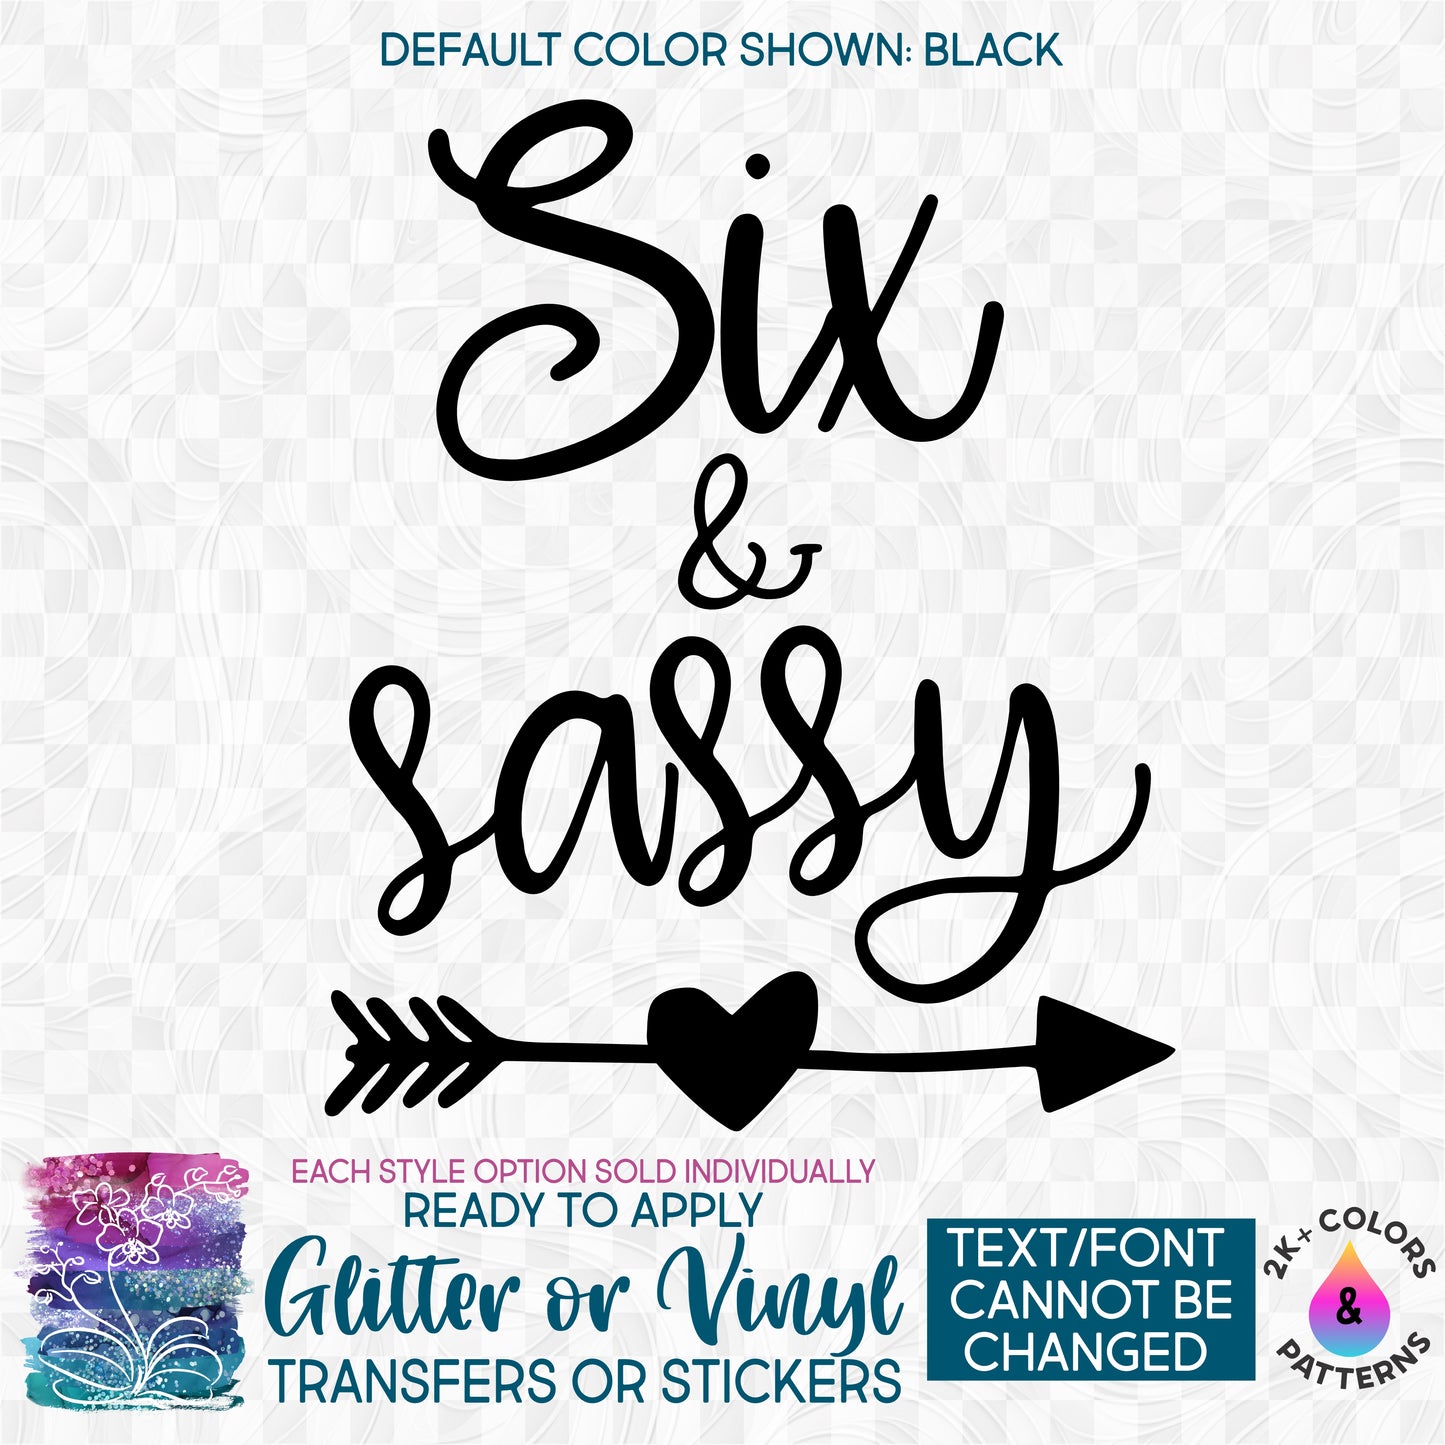 s165-X1 Six & Sassy Made-to-Order Iron-On Transfer or Sticker